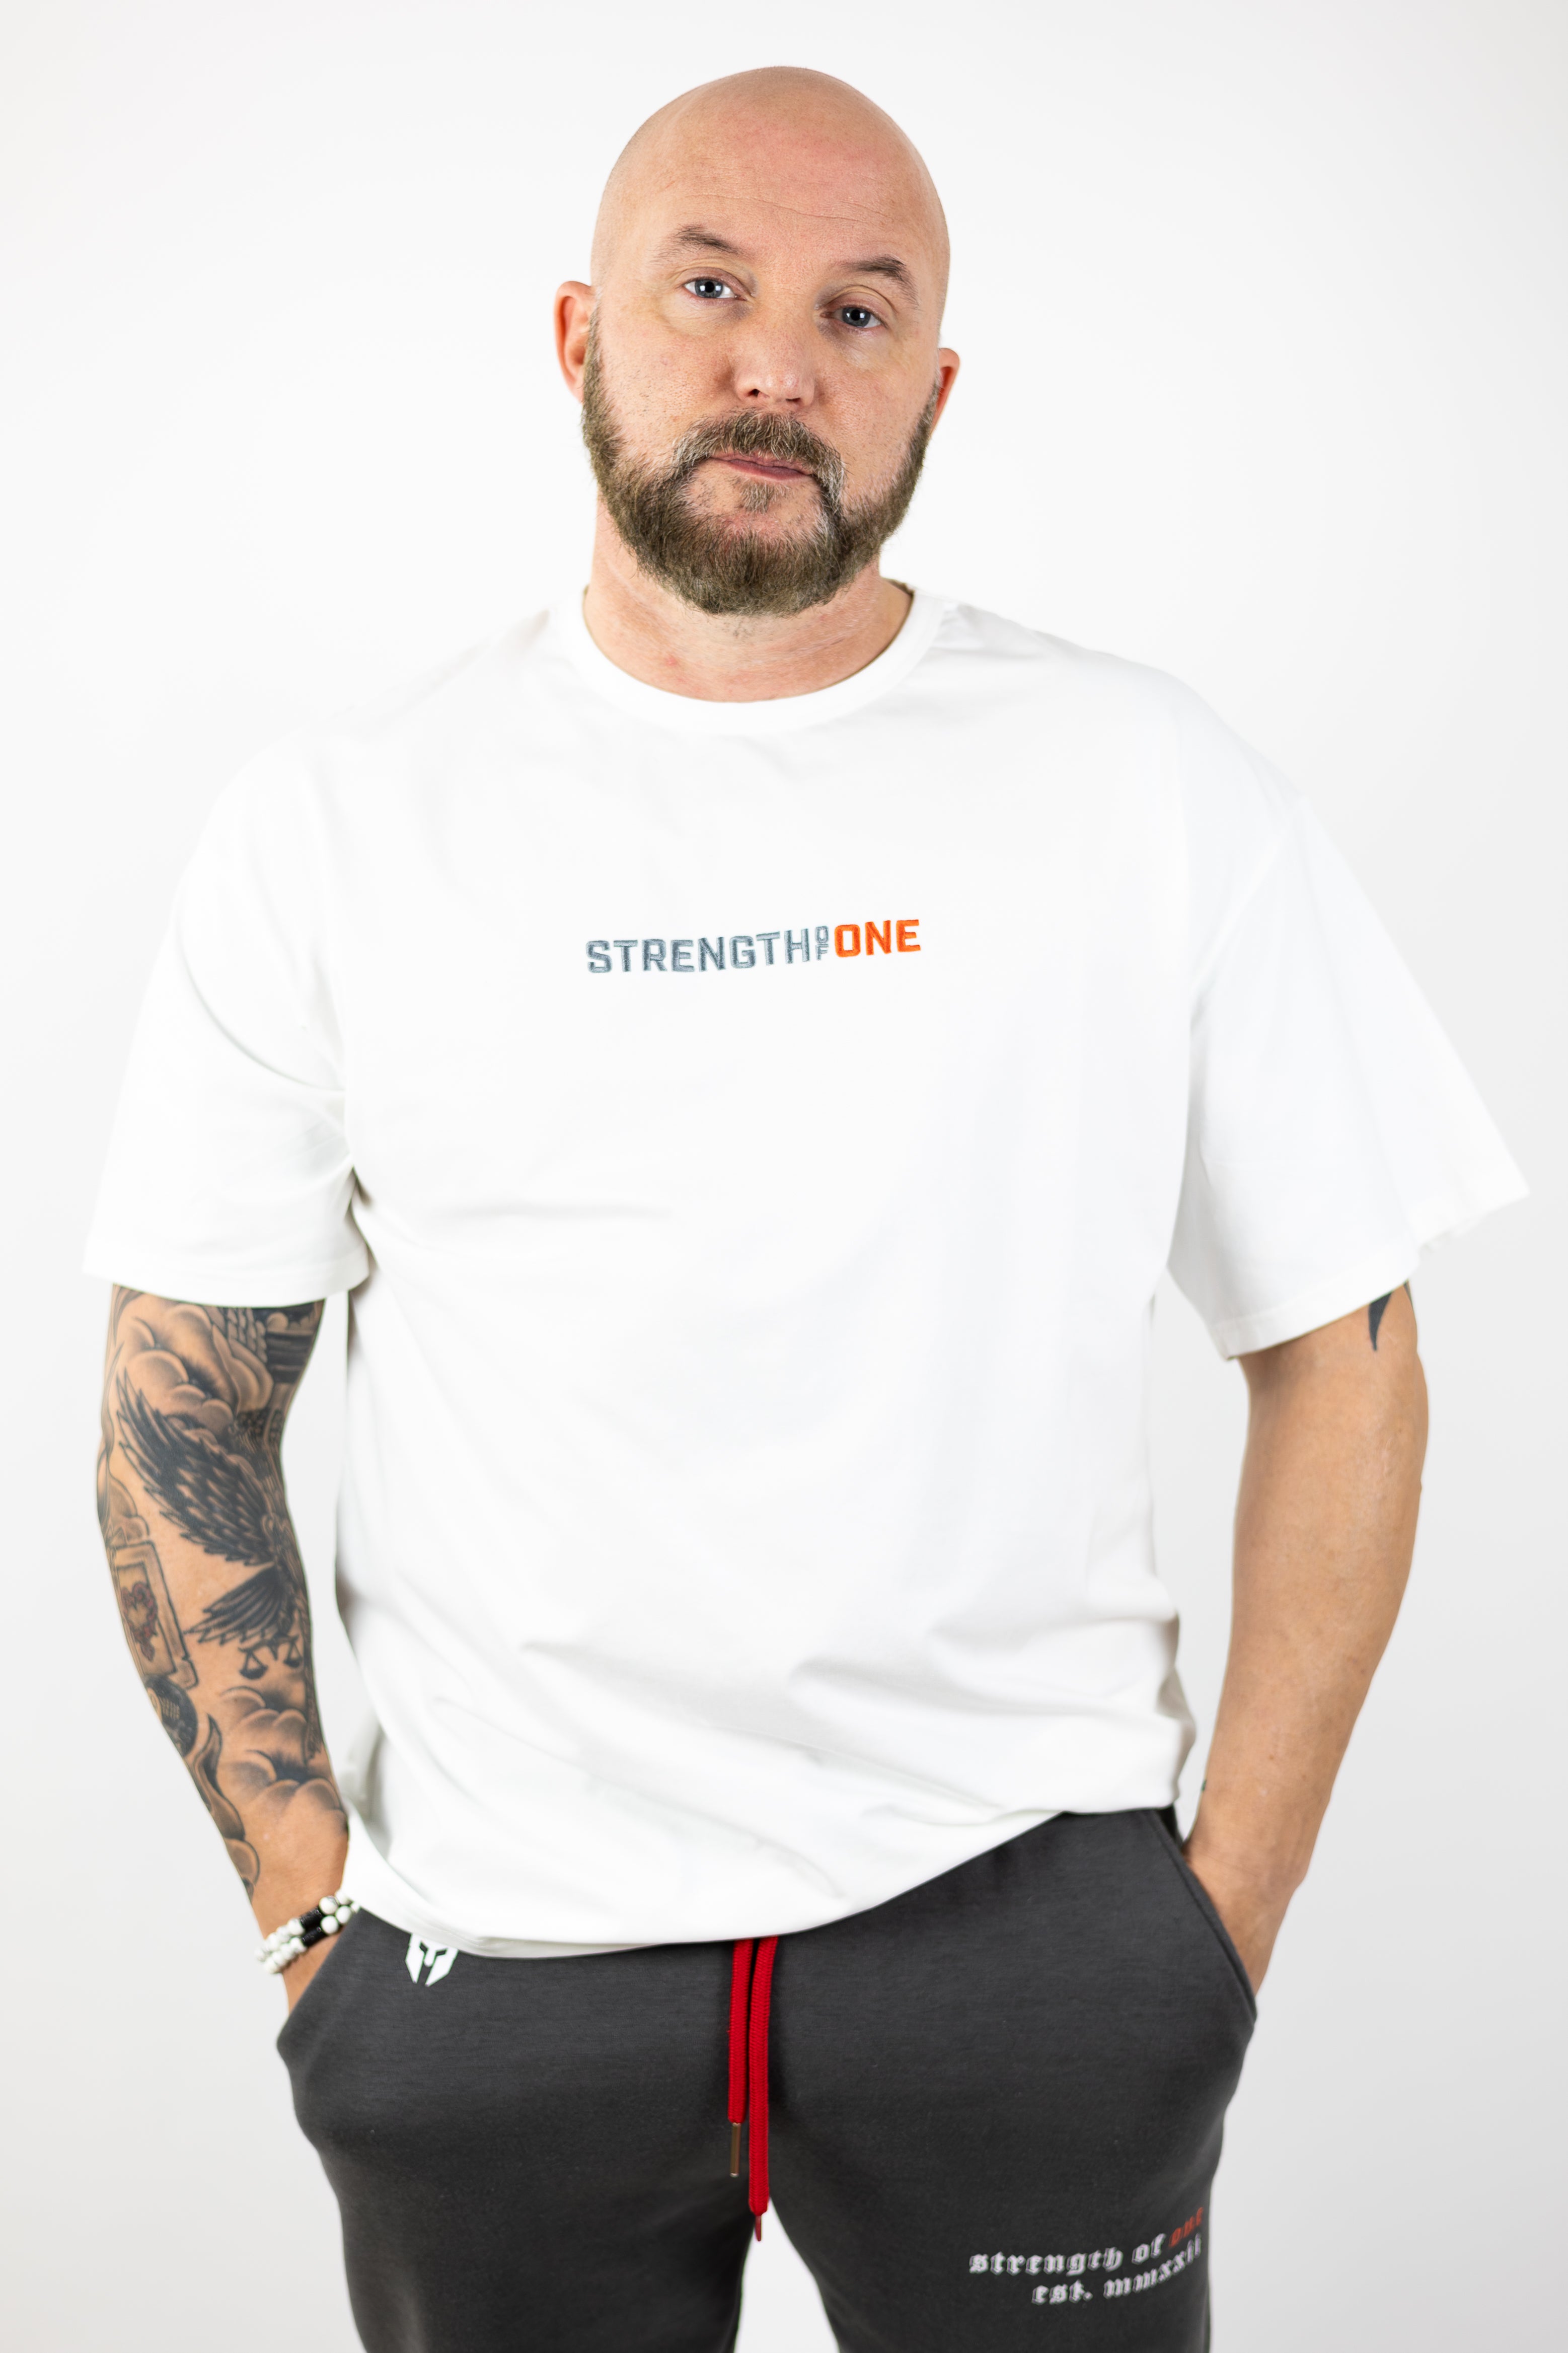 man modeling white Strength of One workout shirt with an embroidered logo reading Strength of One and gray sweatpants